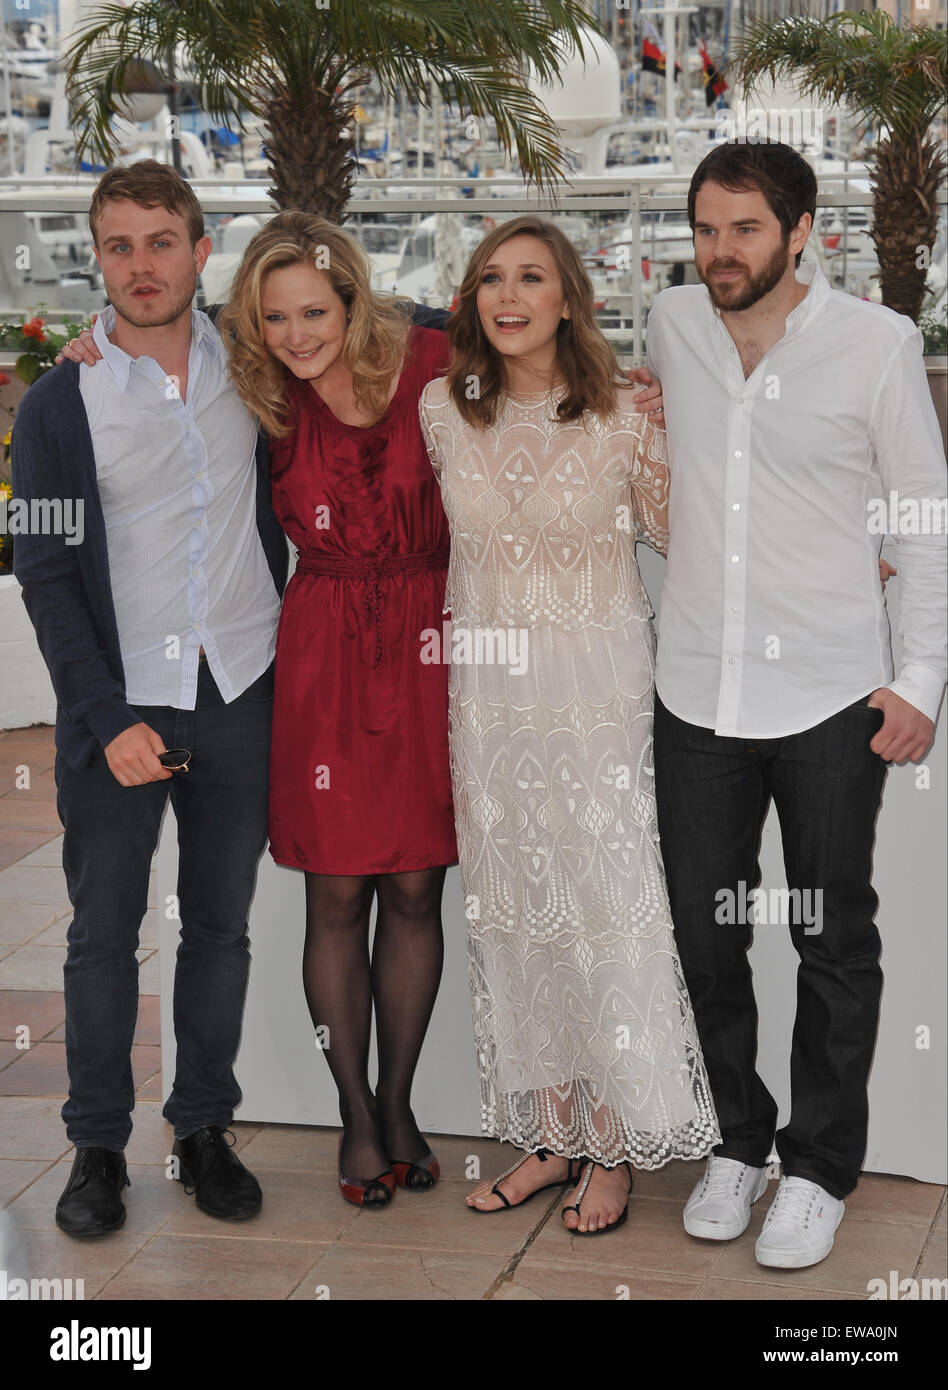 CANNES, FRANCE - MAY 15, 2011: LtoR: Brady Corbet & Louisa Krause & Elizabeth Olsen & director Sean Durkin at the photocall for their movie 'Martha Marcy May Marlene' at the 64th Festival de Cannes. Stock Photo